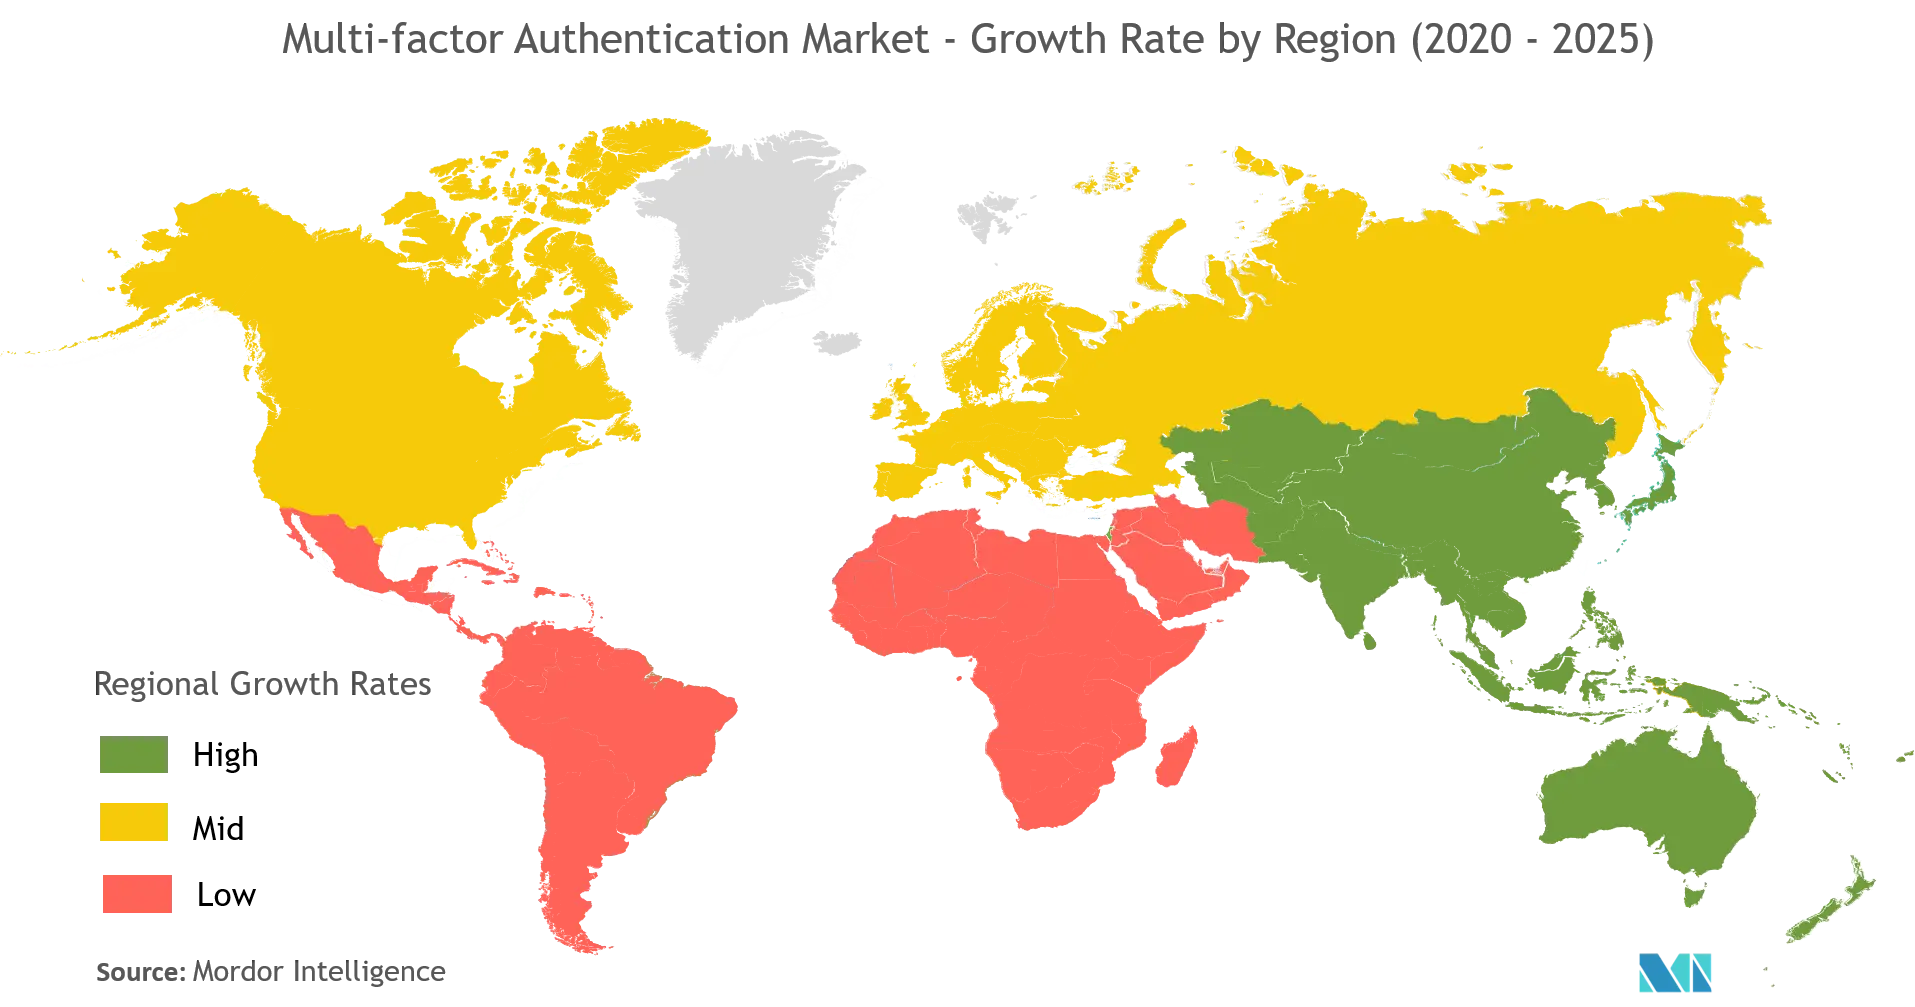 multi-factor authentication market growth rate